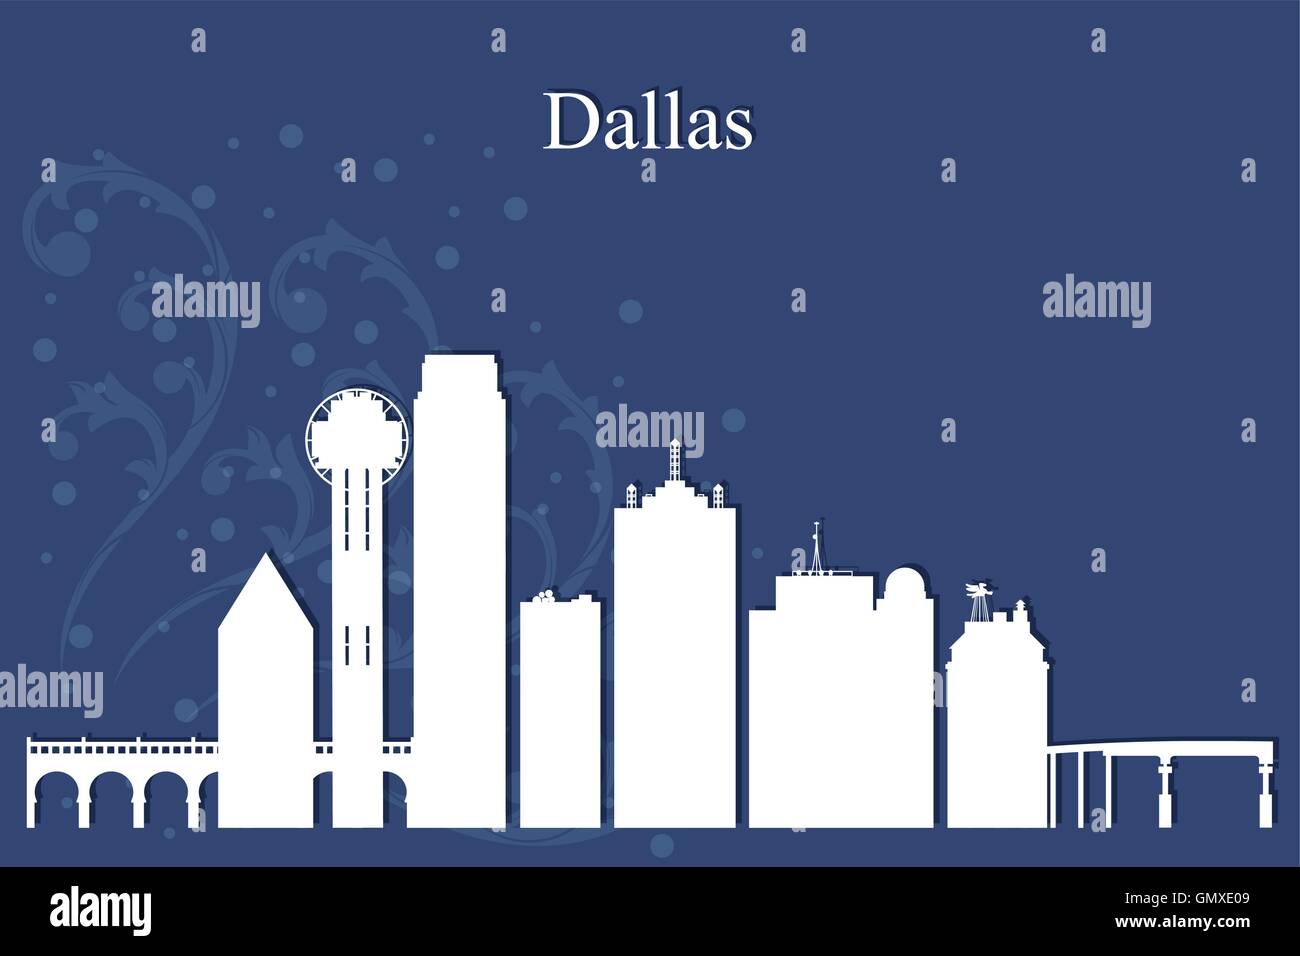 Dallas city skyline silhouette on blue background Stock Vector